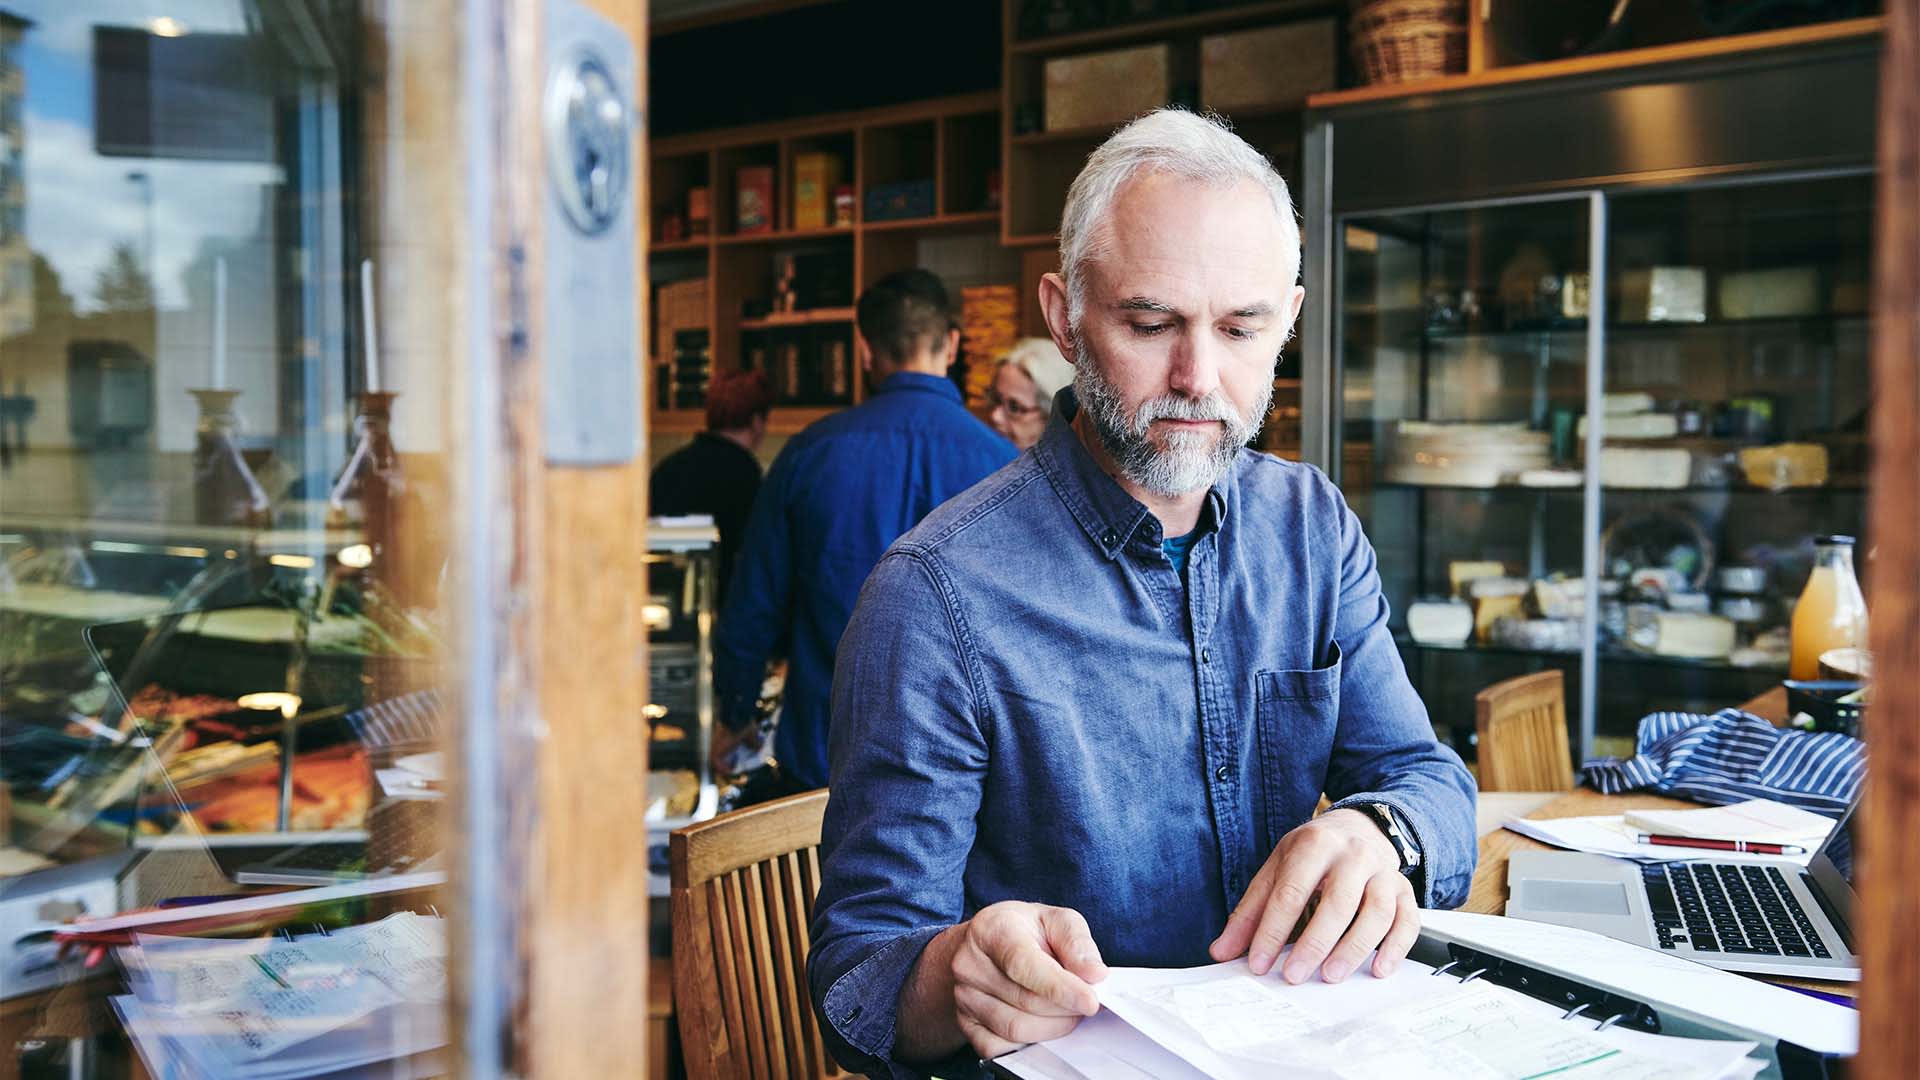 Small Businesses Are Facing a Crippling Paperwork Burden. It's Likely to Get Worse